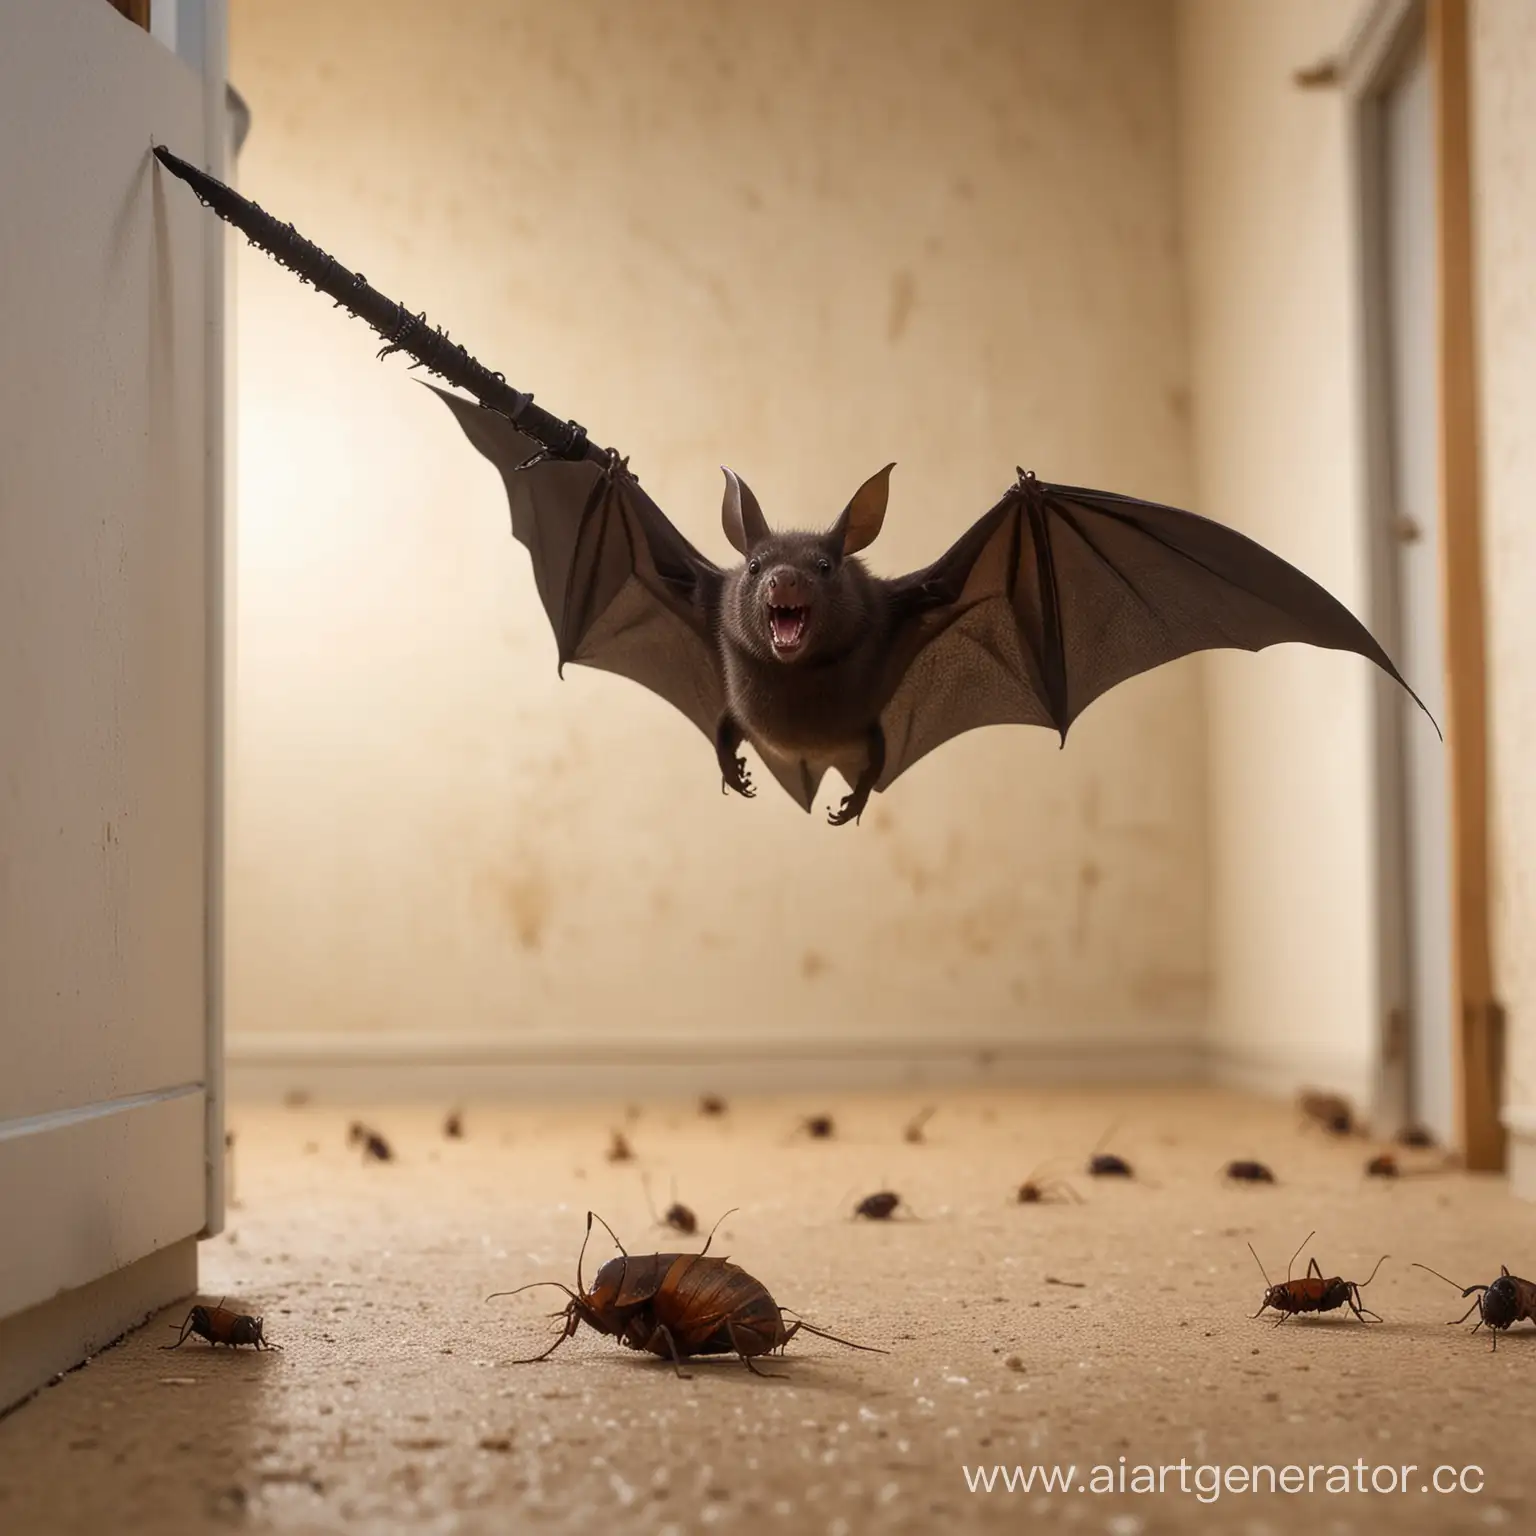 Bat-with-Sword-Fighting-Cockroaches-in-Dormitory